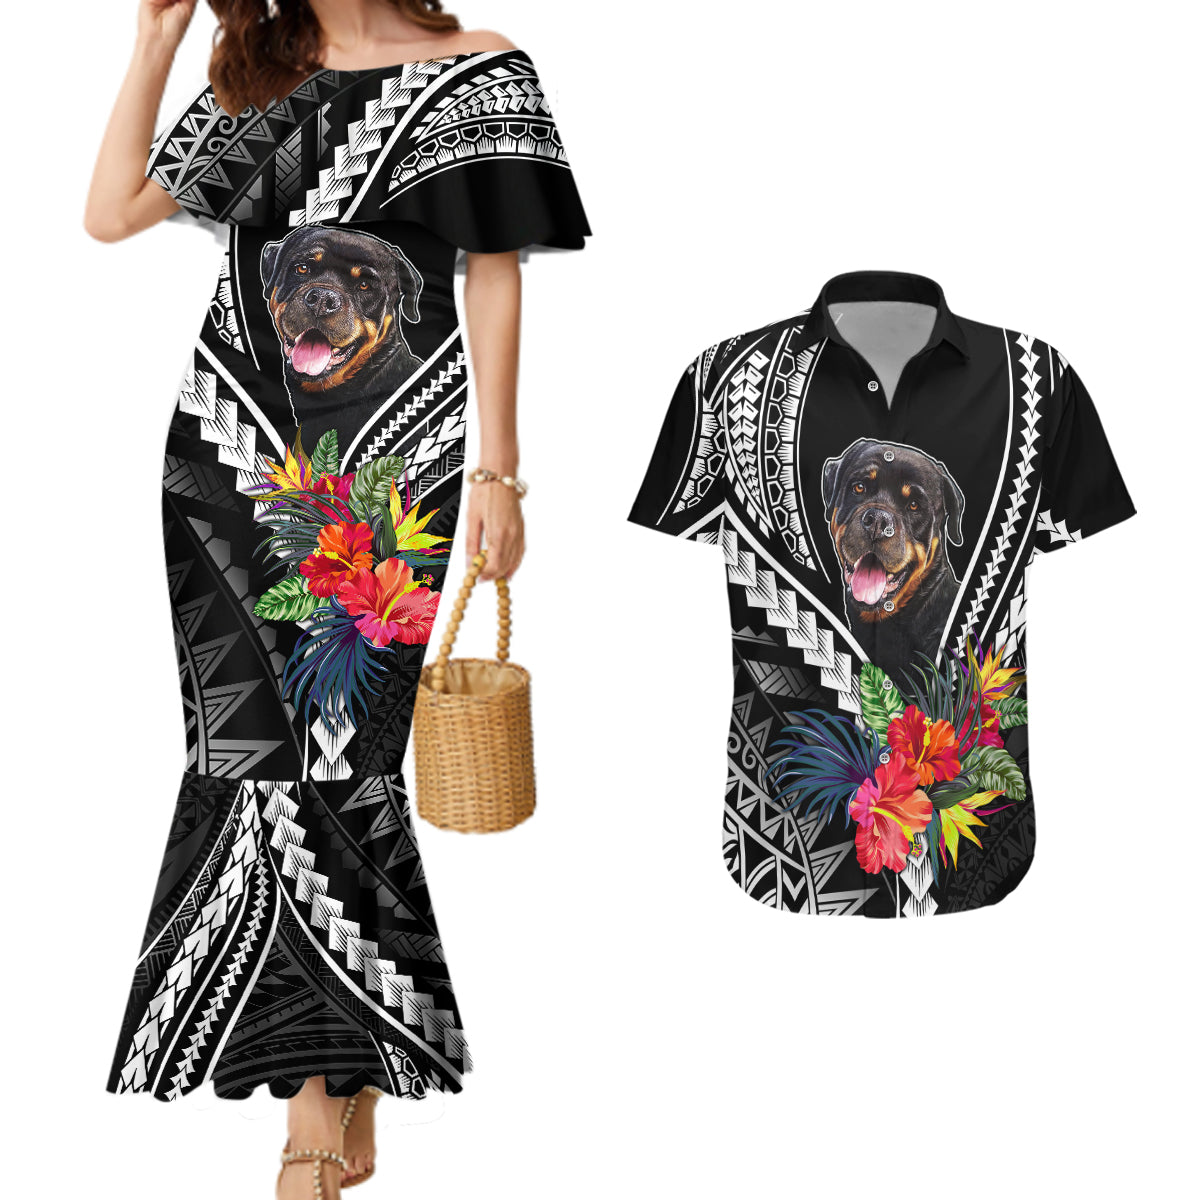 Personalised Polynesian Dog Couples Matching Mermaid Dress And Hawaiian Shirt Rottweiler With Polynesia Pattern Curve Style LT7 Black - Polynesian Pride